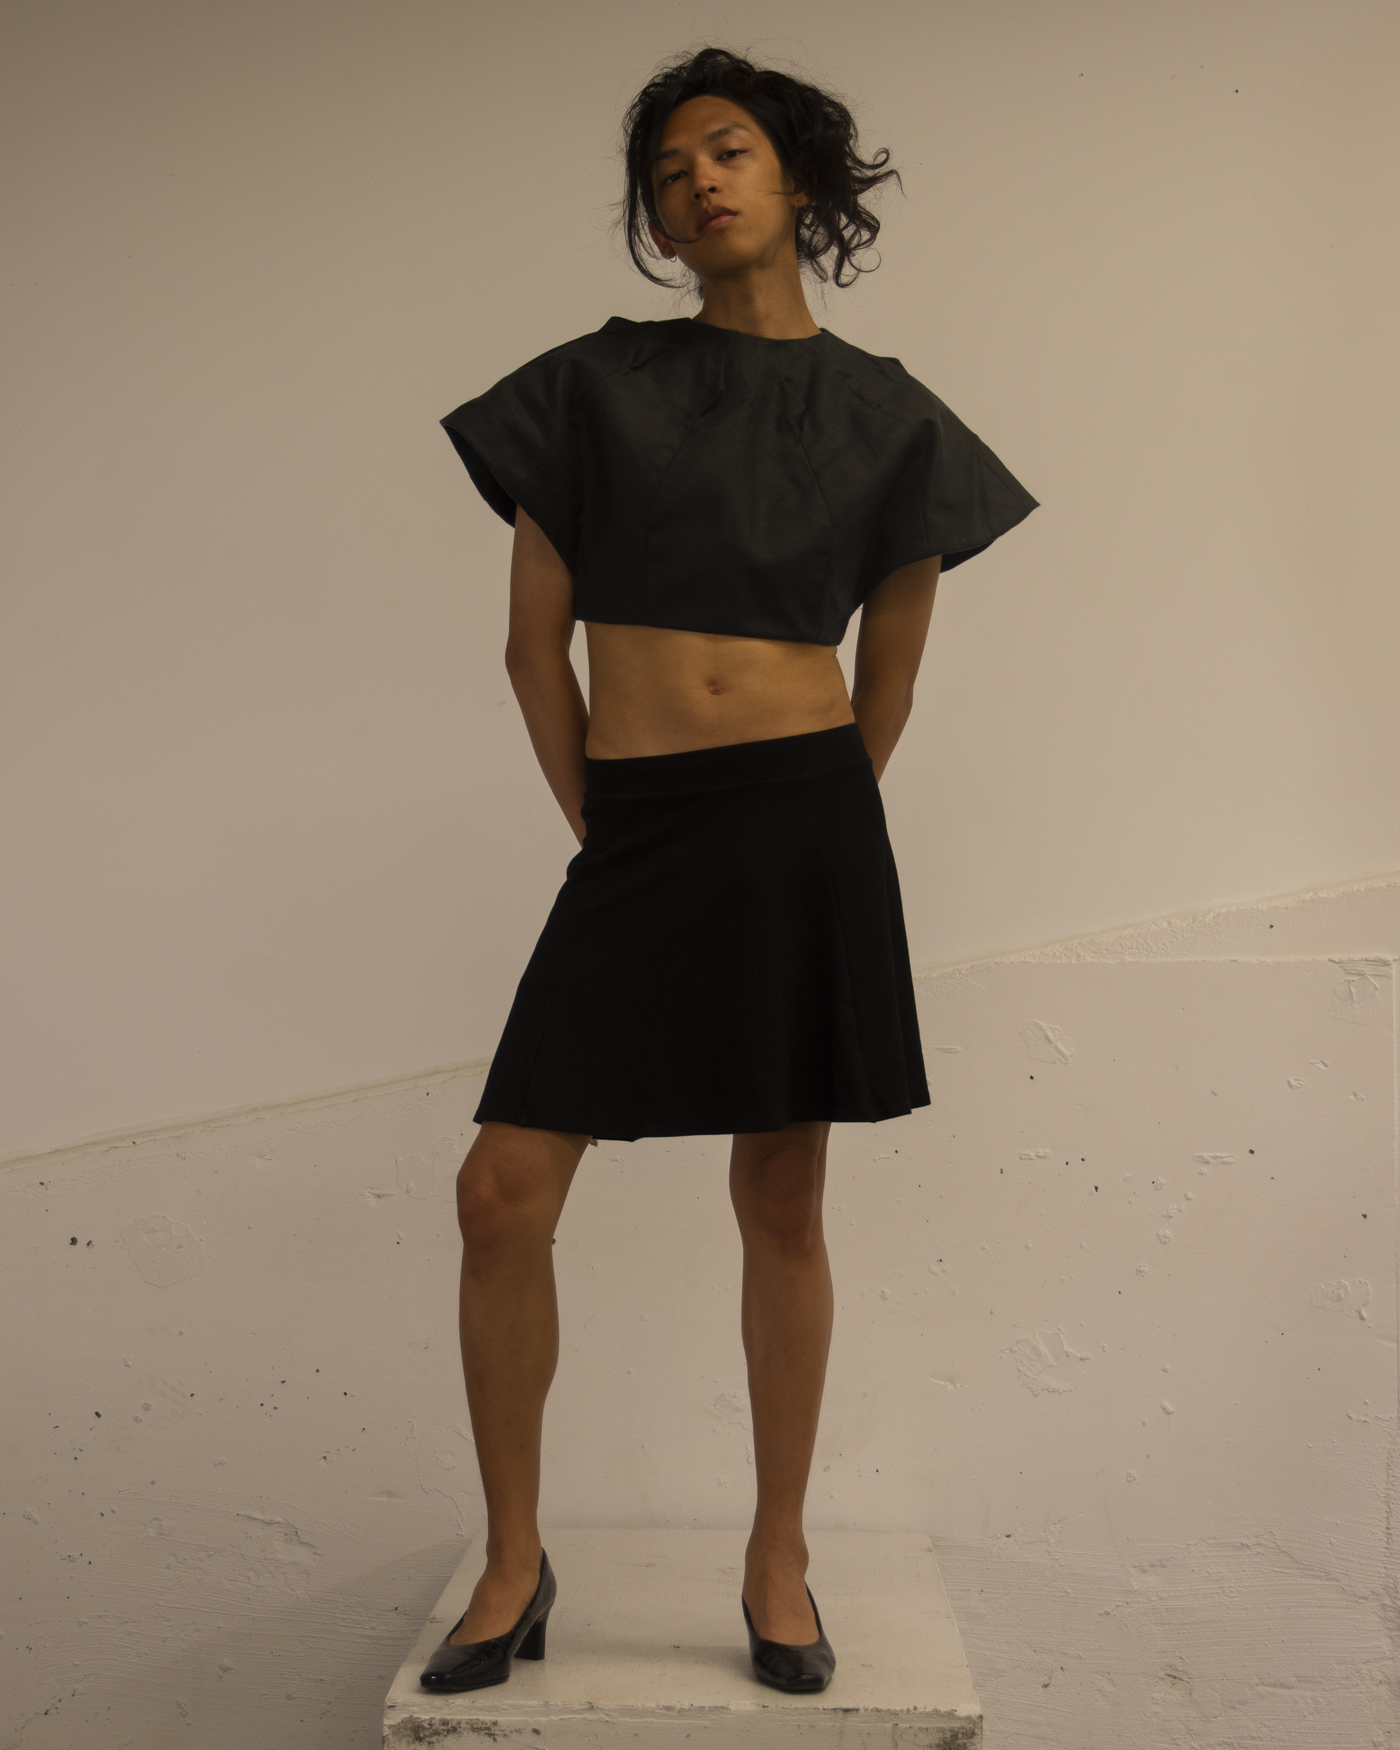 The Artist wears an angular top that is cropped at the waist along with a simple black skirt.